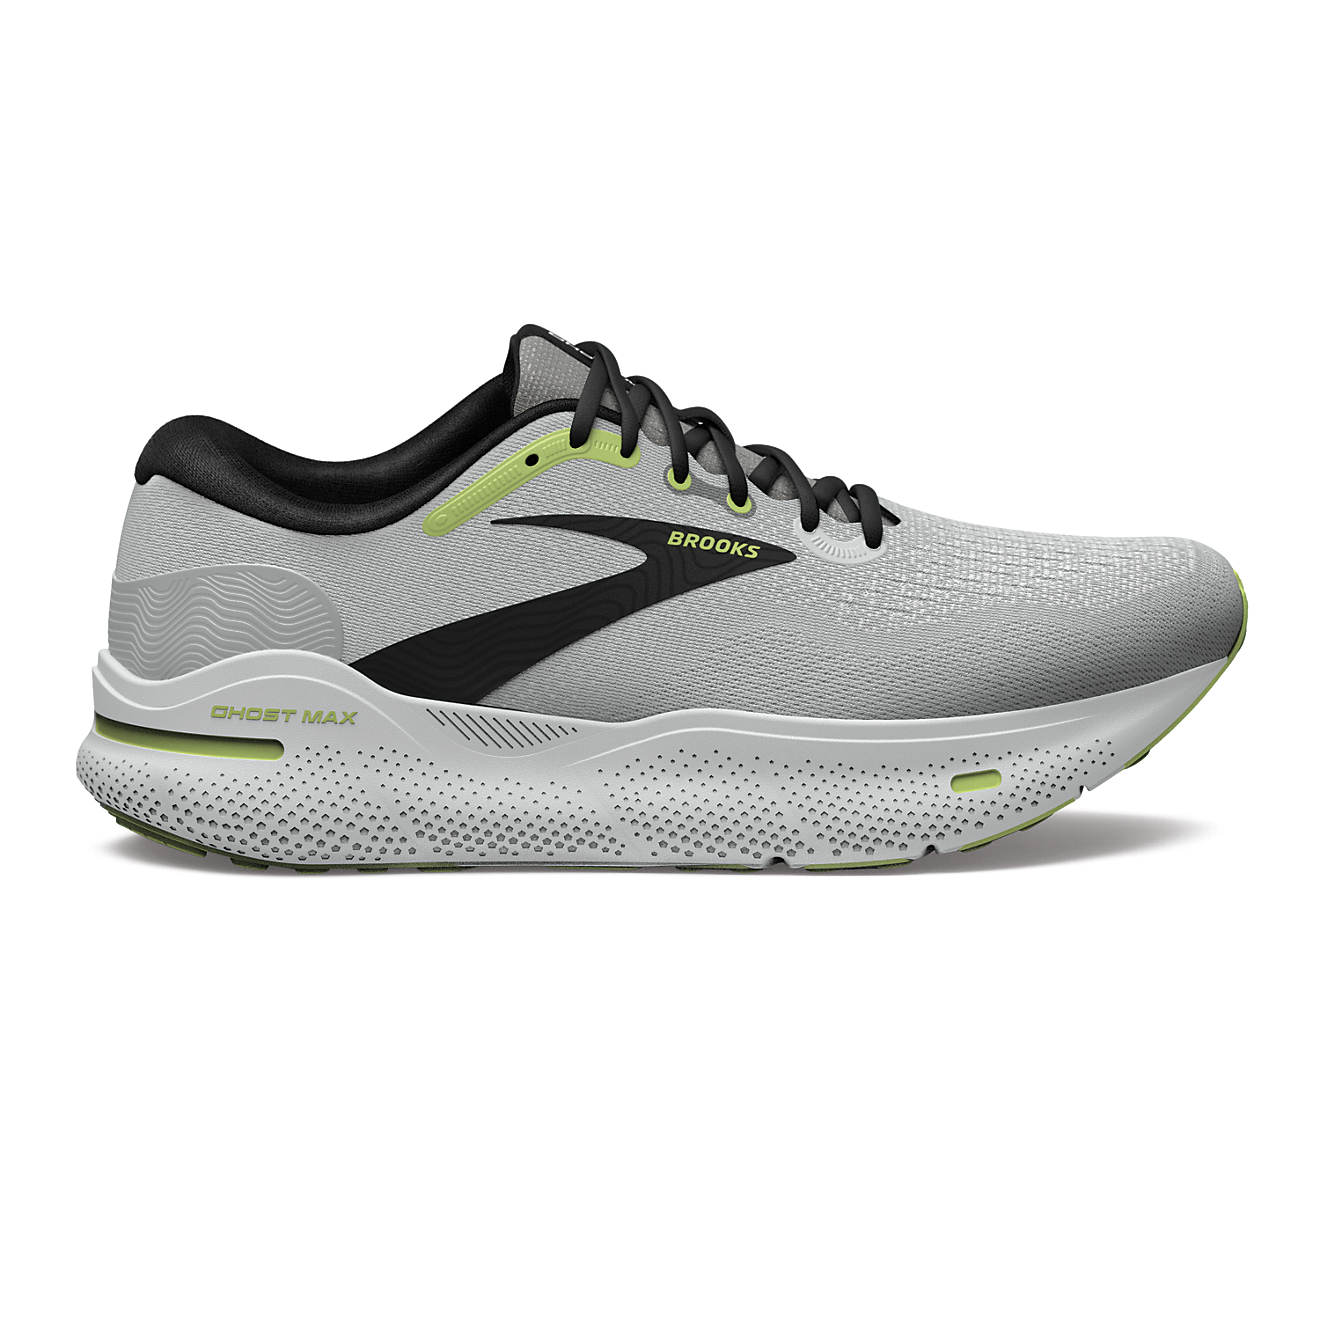 Brooks Men's Ghost Max Running Shoes                                                                                             - view number 1